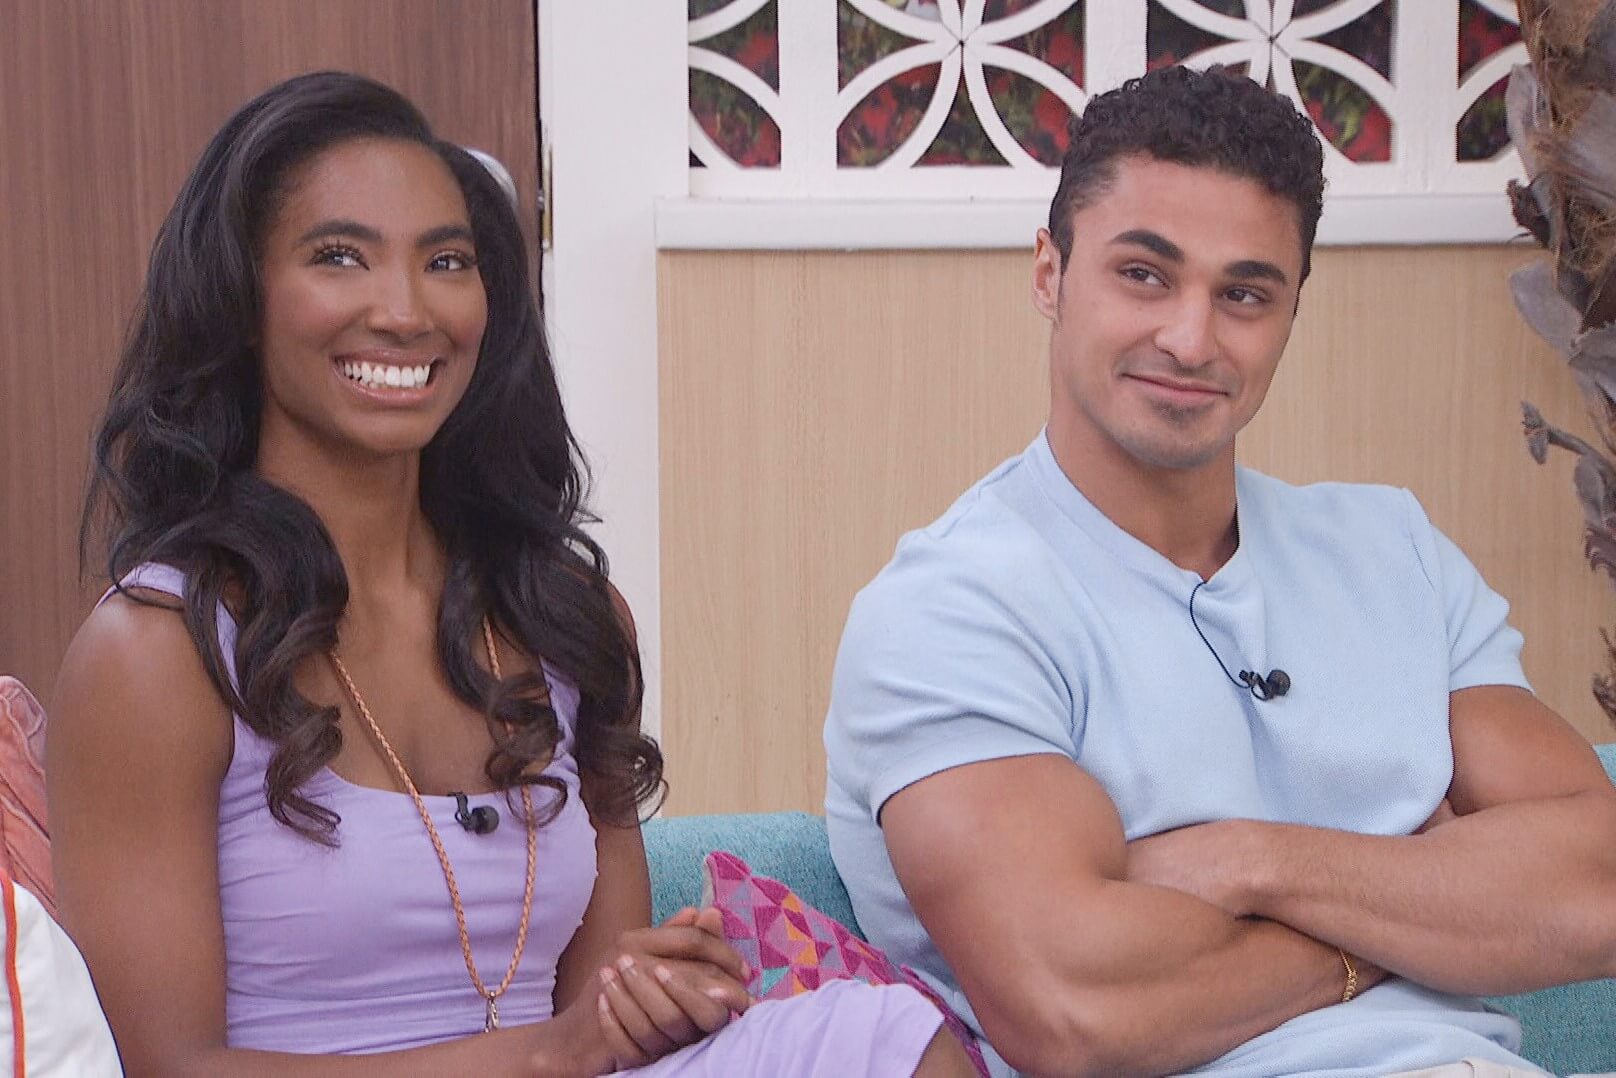 Taylor Hale and Joseph Abdin, who started dating after meeting in the 'Big Brother 24' house, sit next to each other on the couch during a live episode. Taylor wears a light purple dress. Joseph wears a light blue shirt.